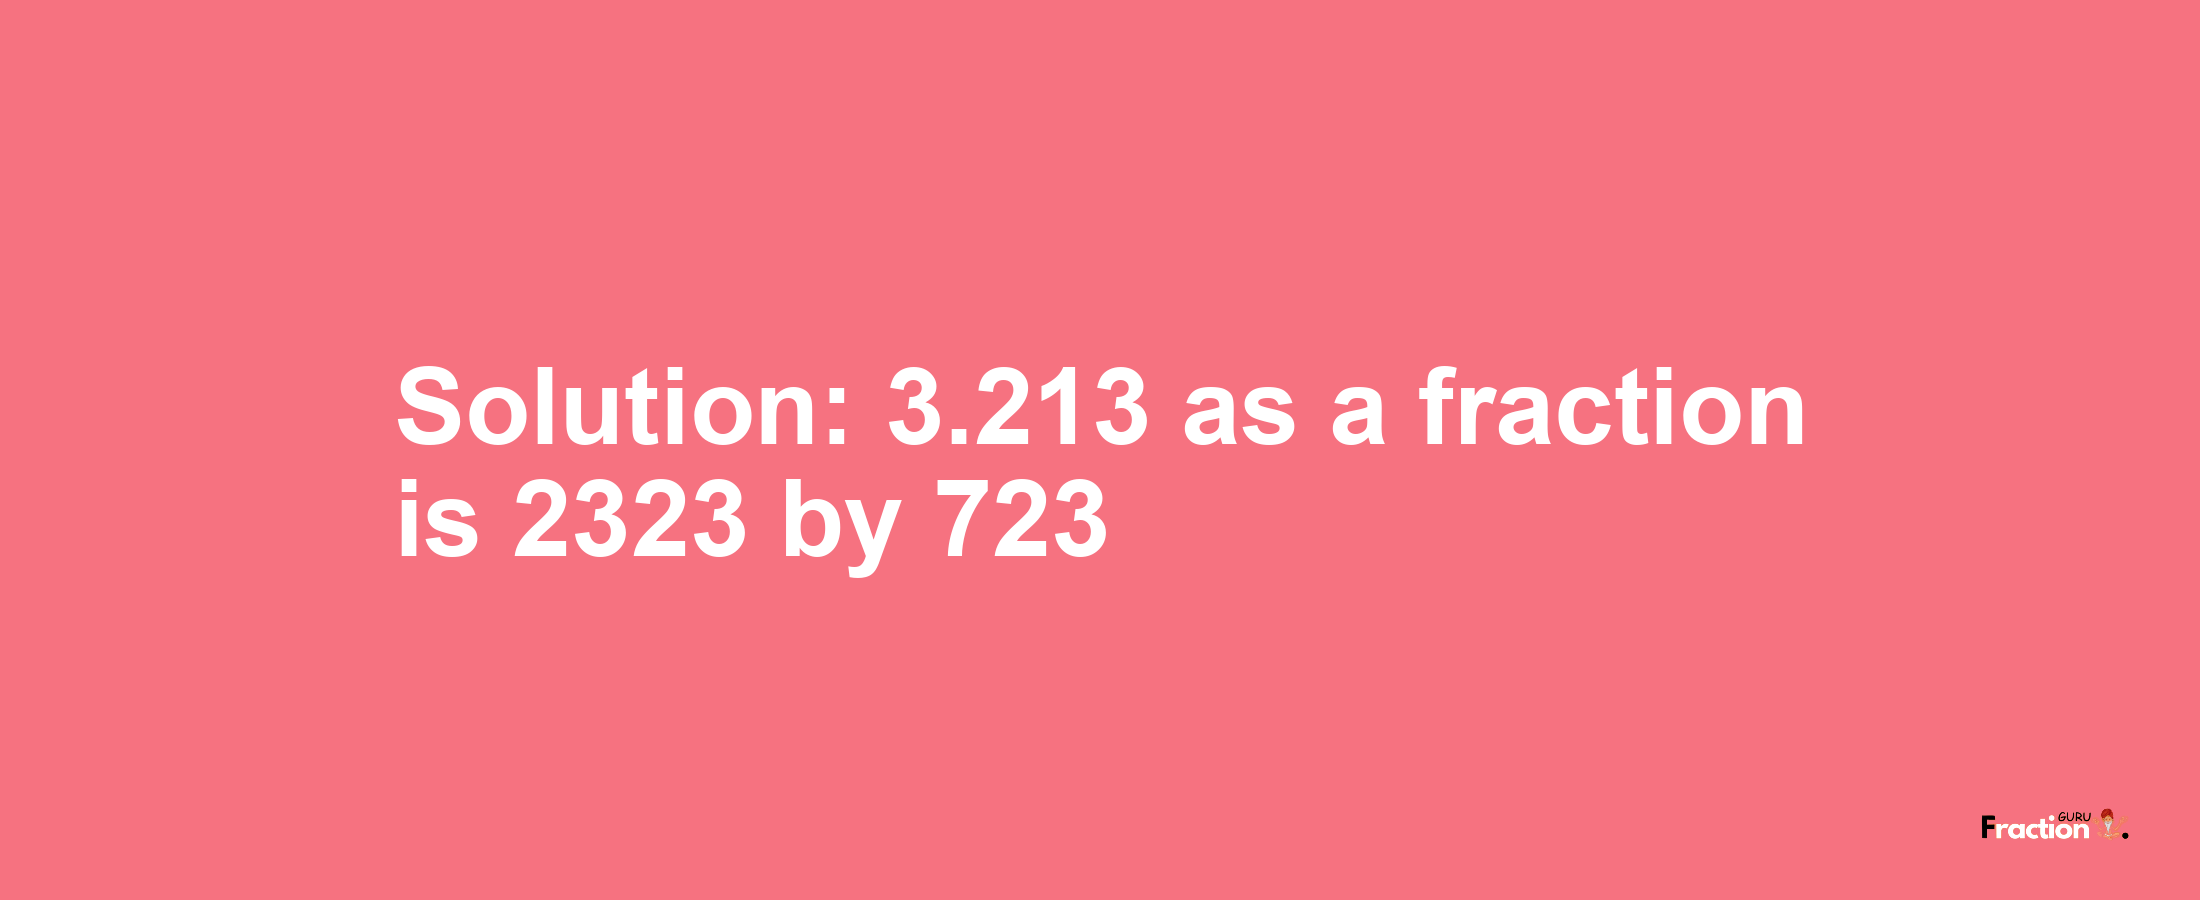 Solution:3.213 as a fraction is 2323/723